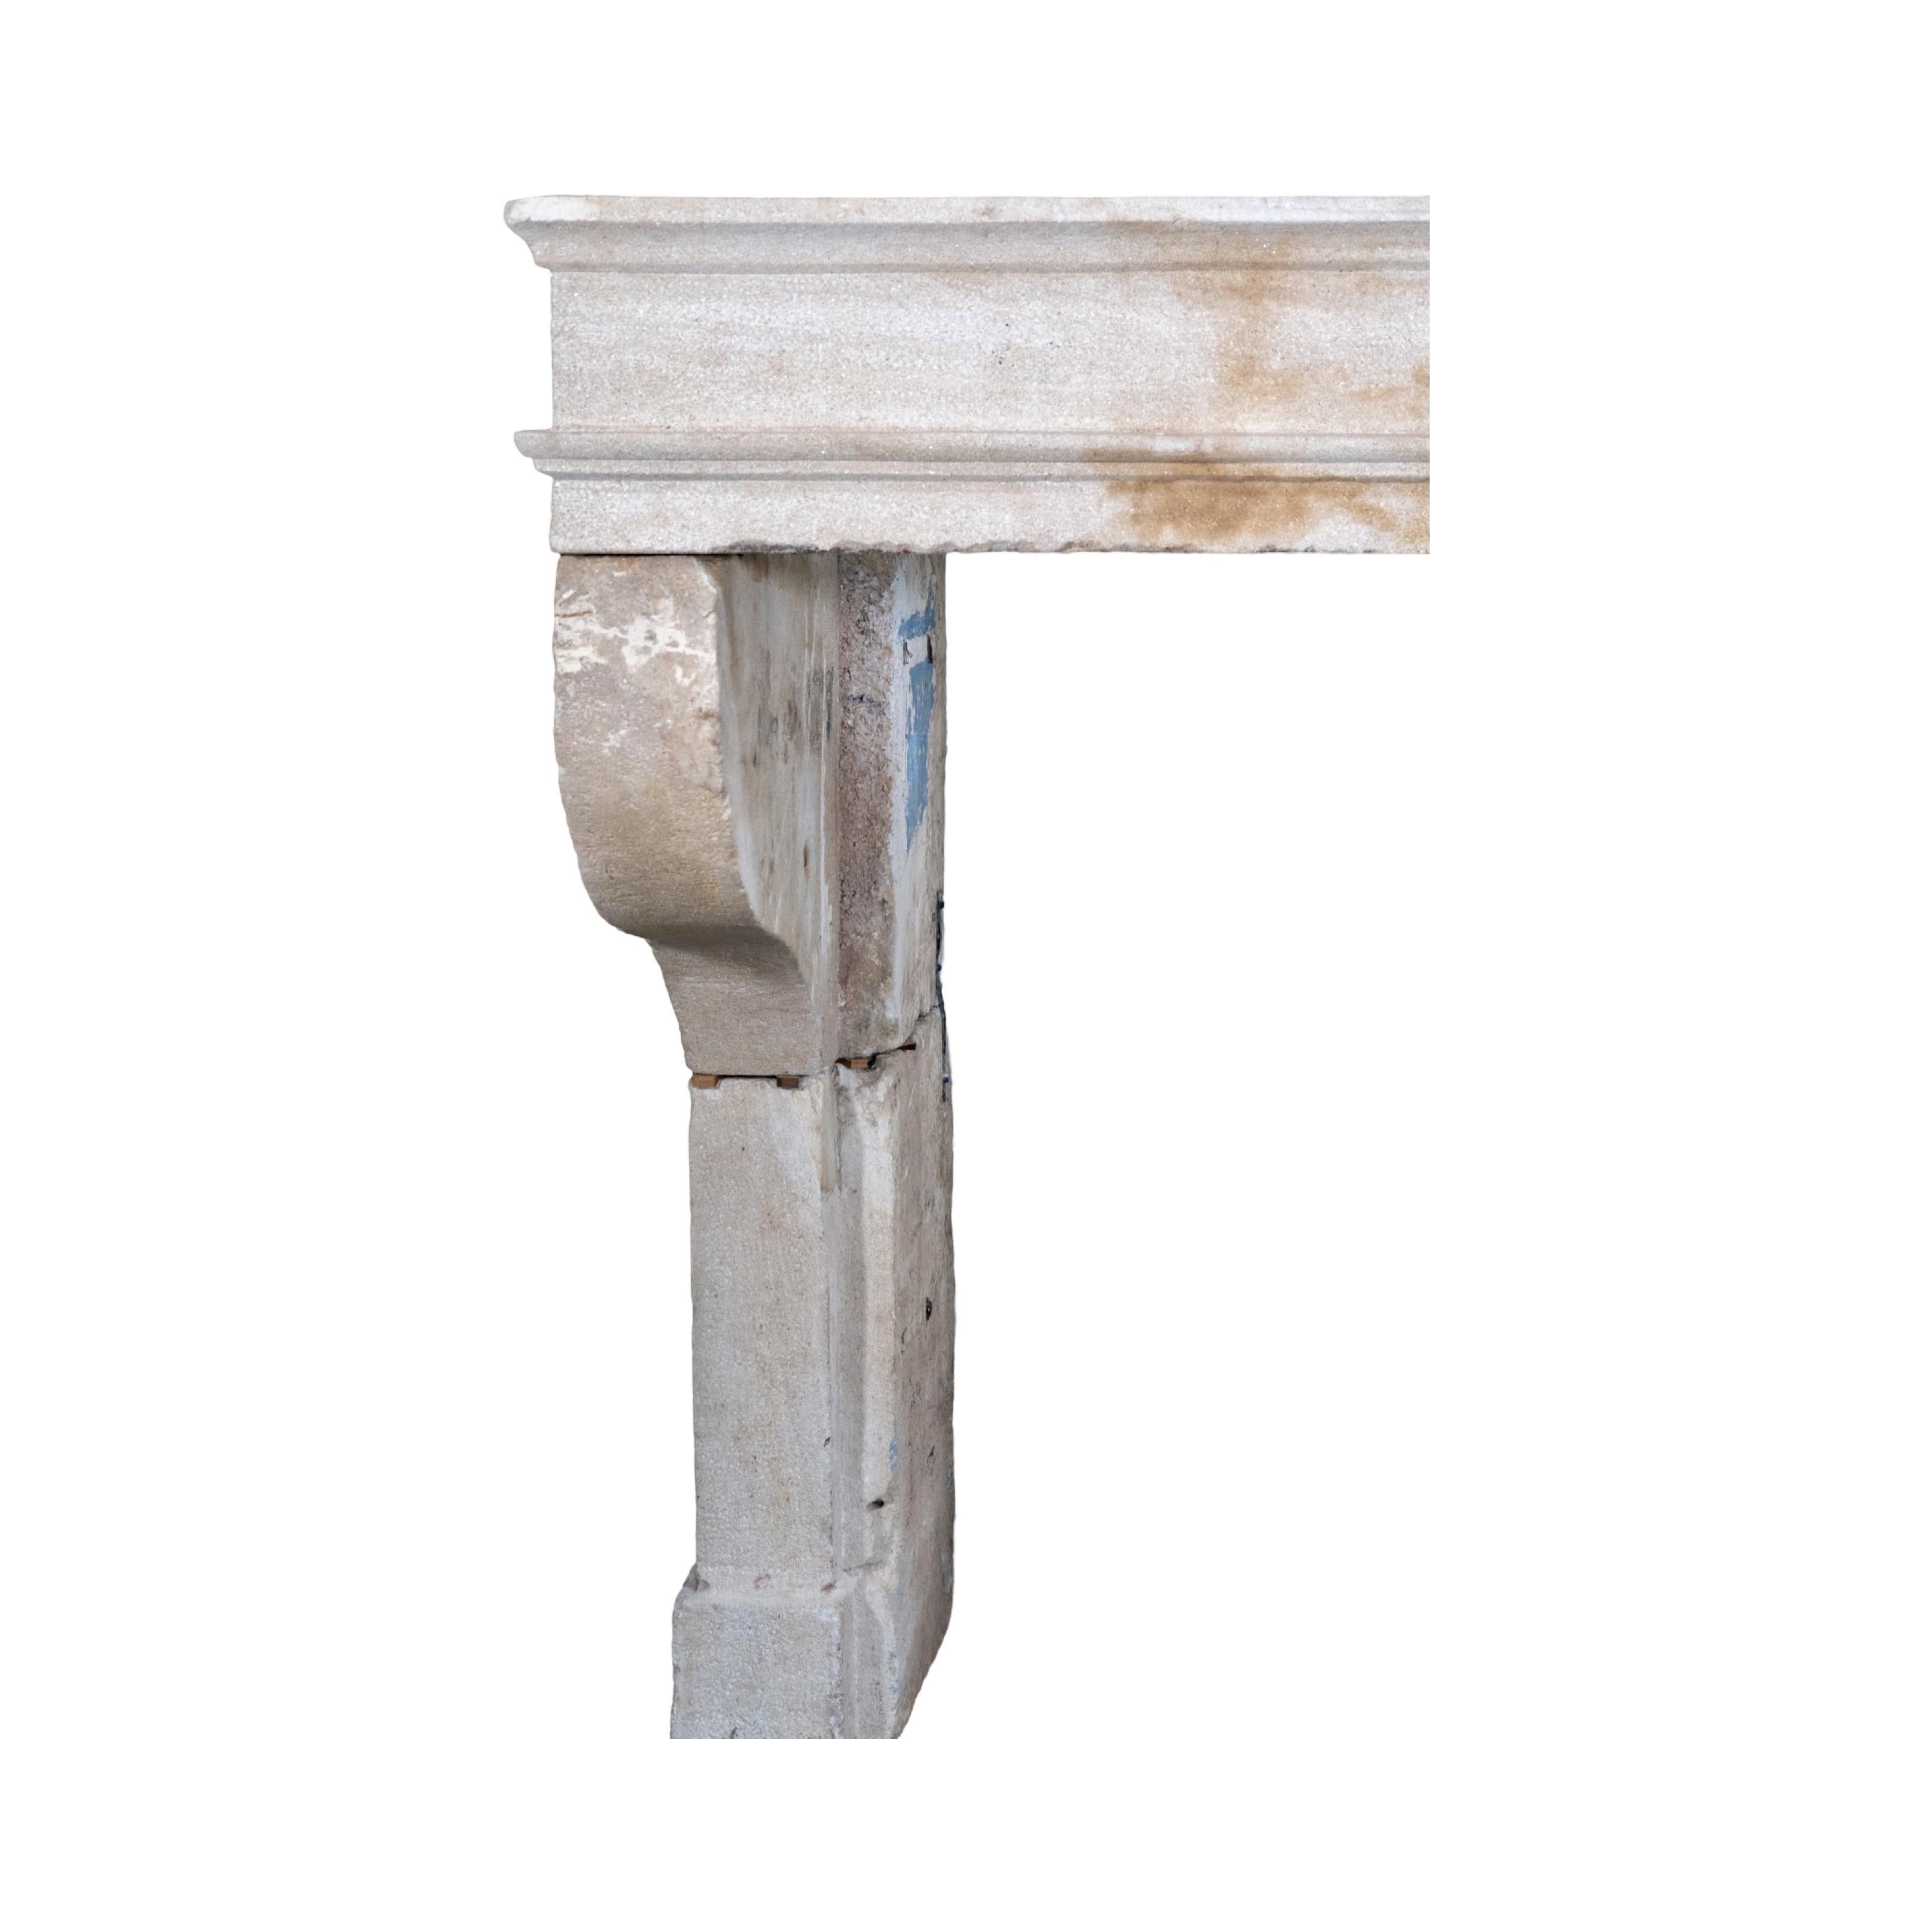 Crafted from beautiful French limestone, this fireplace mantel dates back to the 1790s. Its timeless design offers both elegance and durability. Bring a touch of history into your home with this exquisite piece.